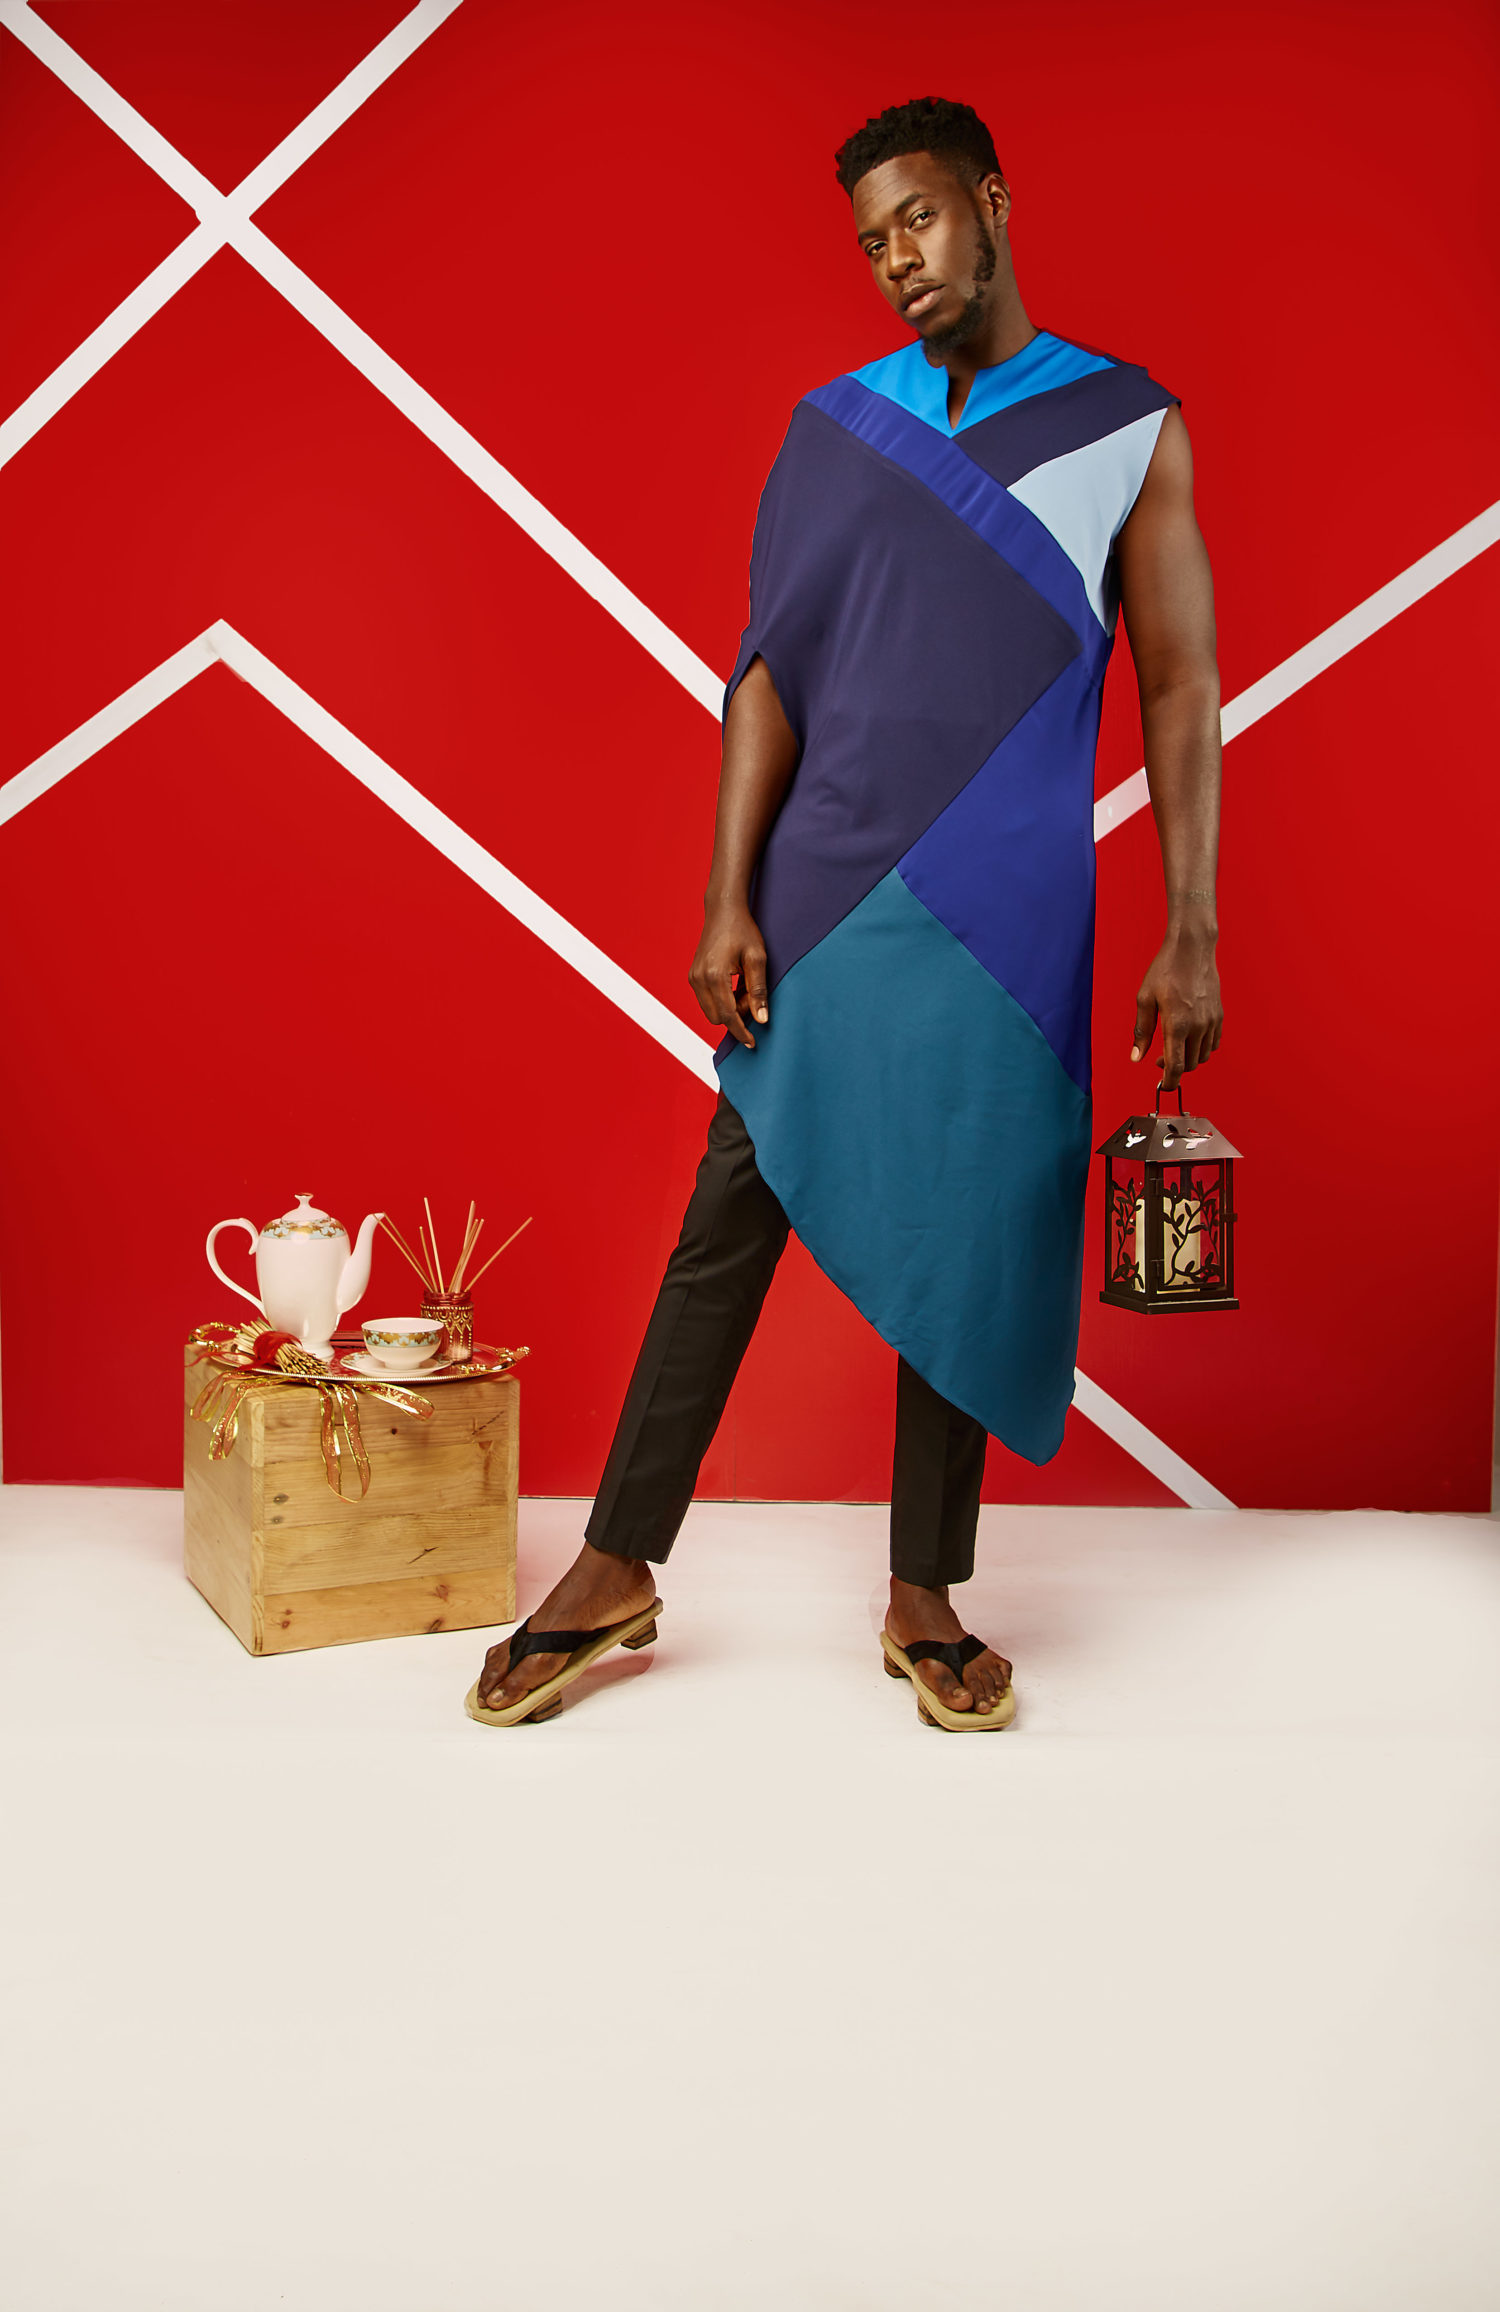 MUST SEE: Signore Fusion by Vanskere Presents “Kabuki” For Spring/Summer 2019